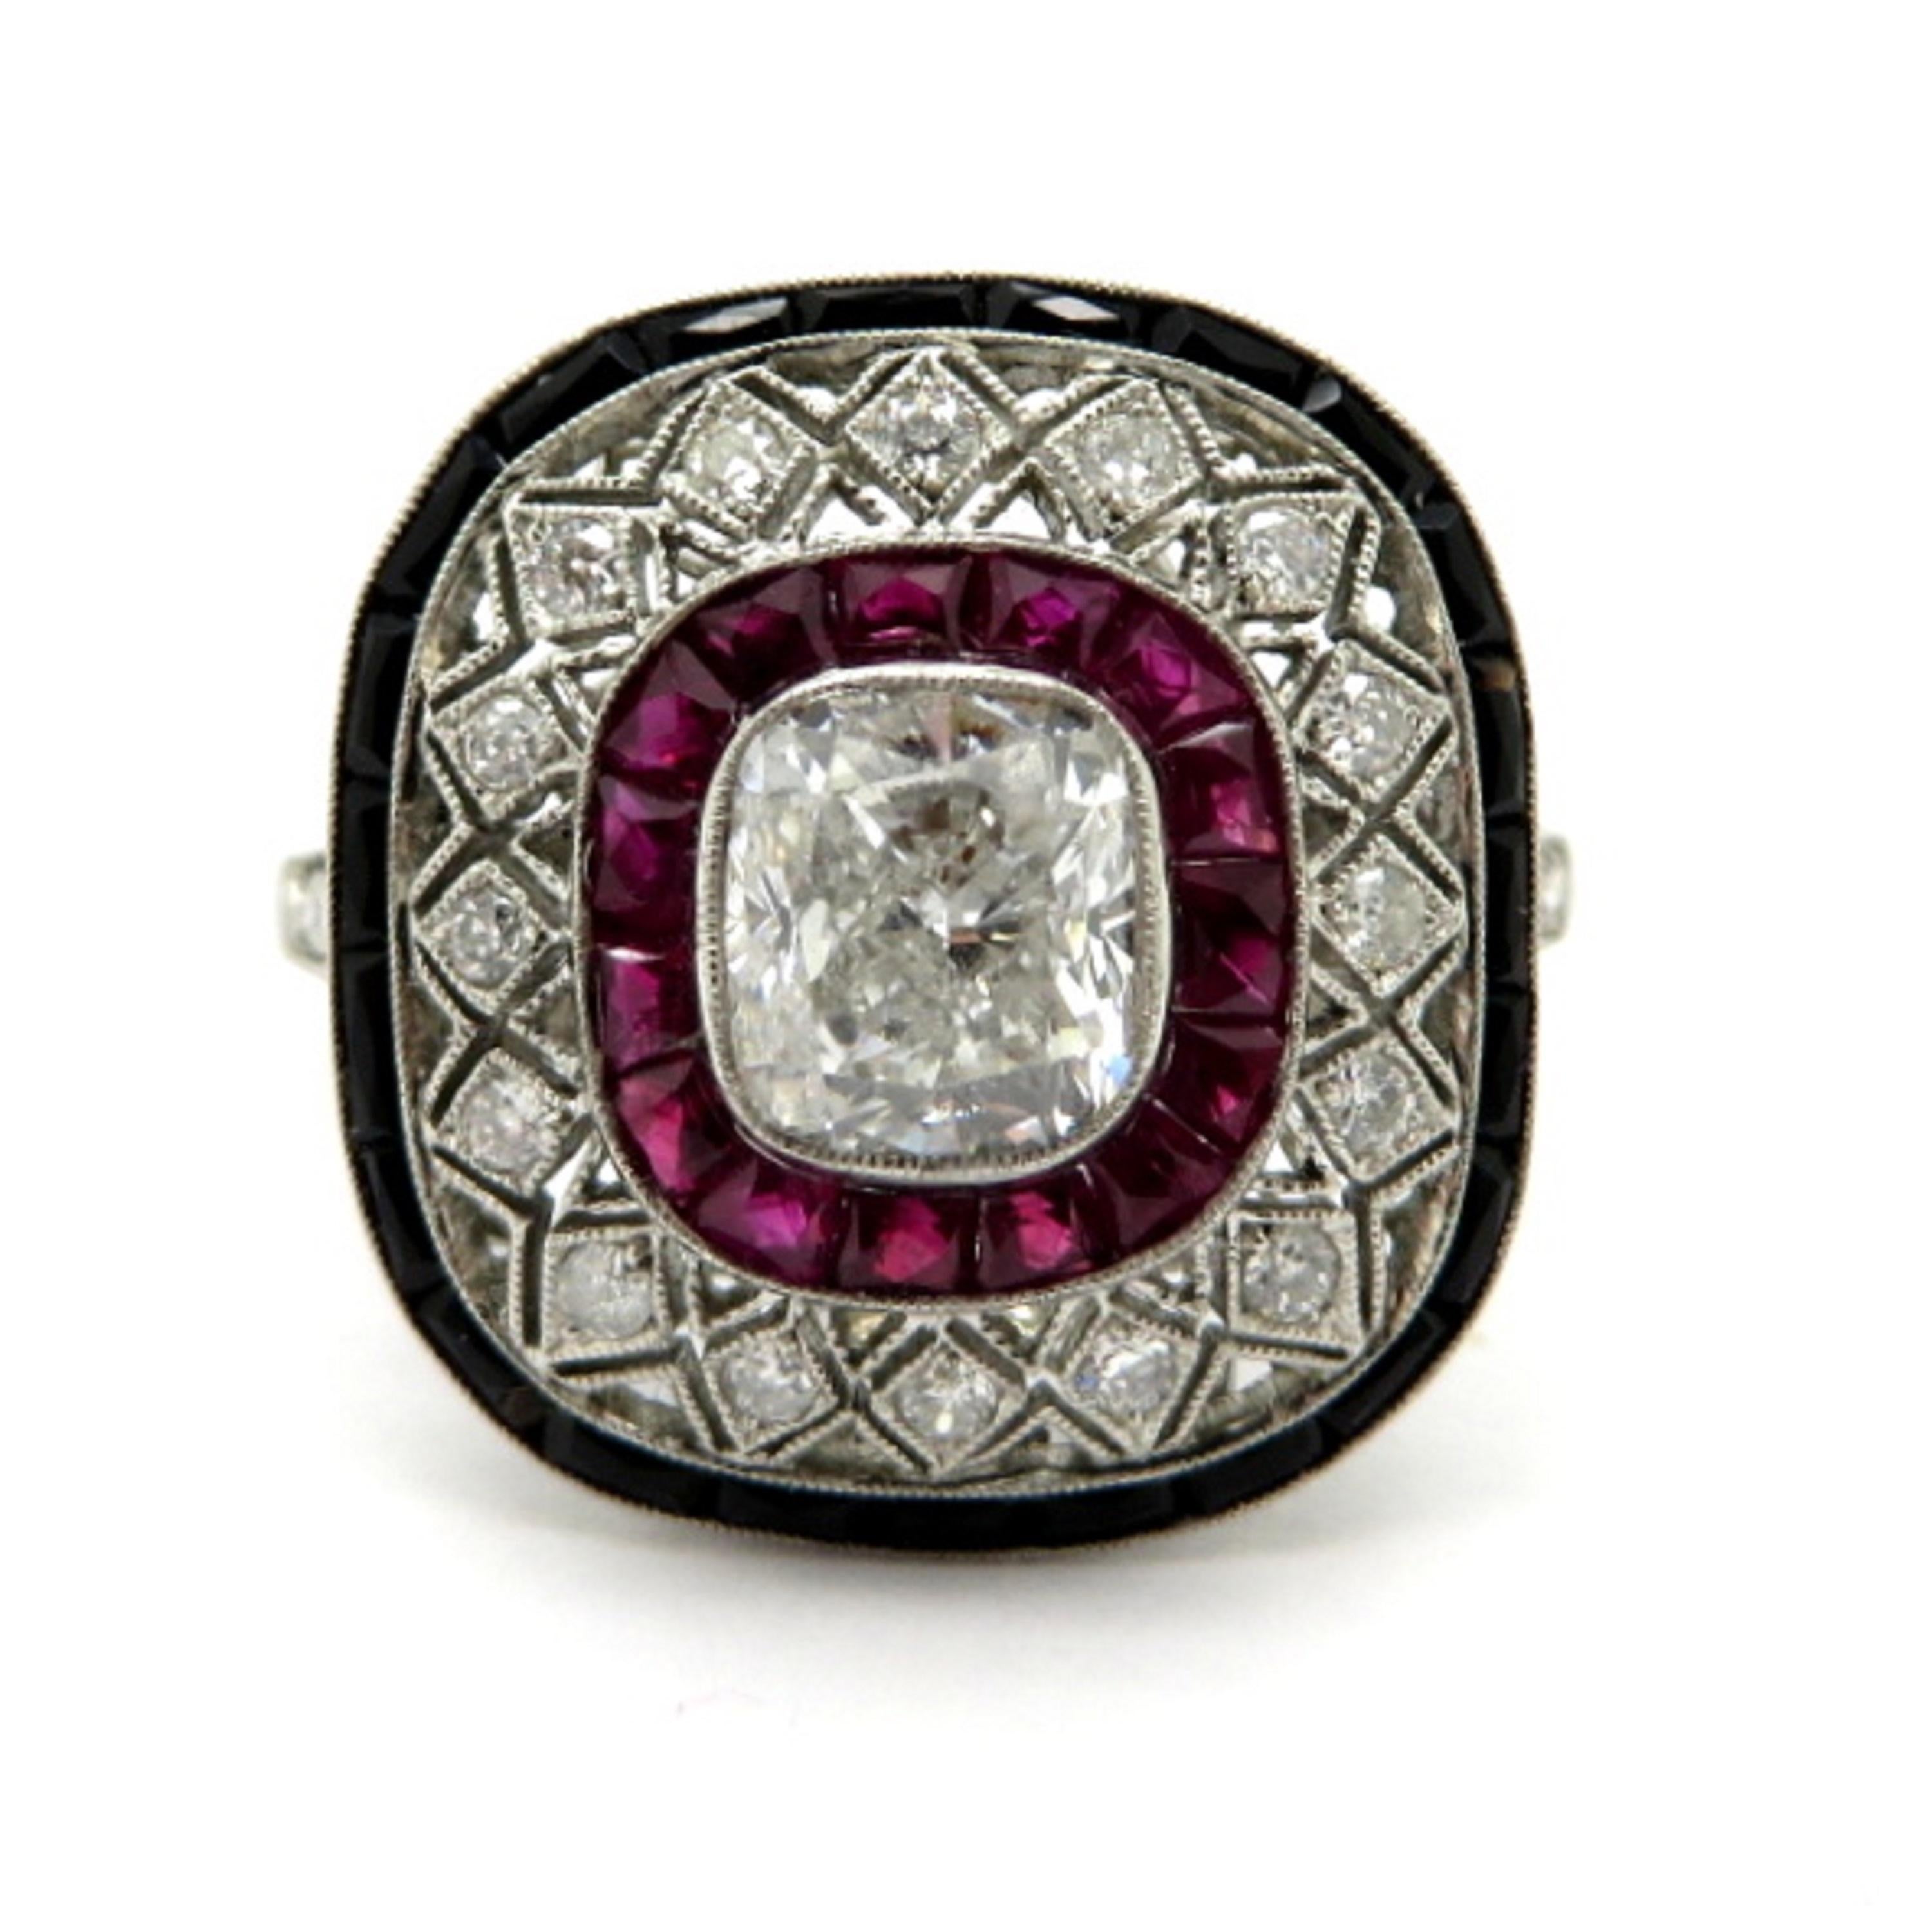 Platinum estate cushion diamond, ruby, and onyx  antique ring. Centering one cushion cut diamond weighing 1.01 carats, having H color grade and I1 clarity grade. Accented with 15 French cut 
fine quality rubies and a border of French cut black onyx